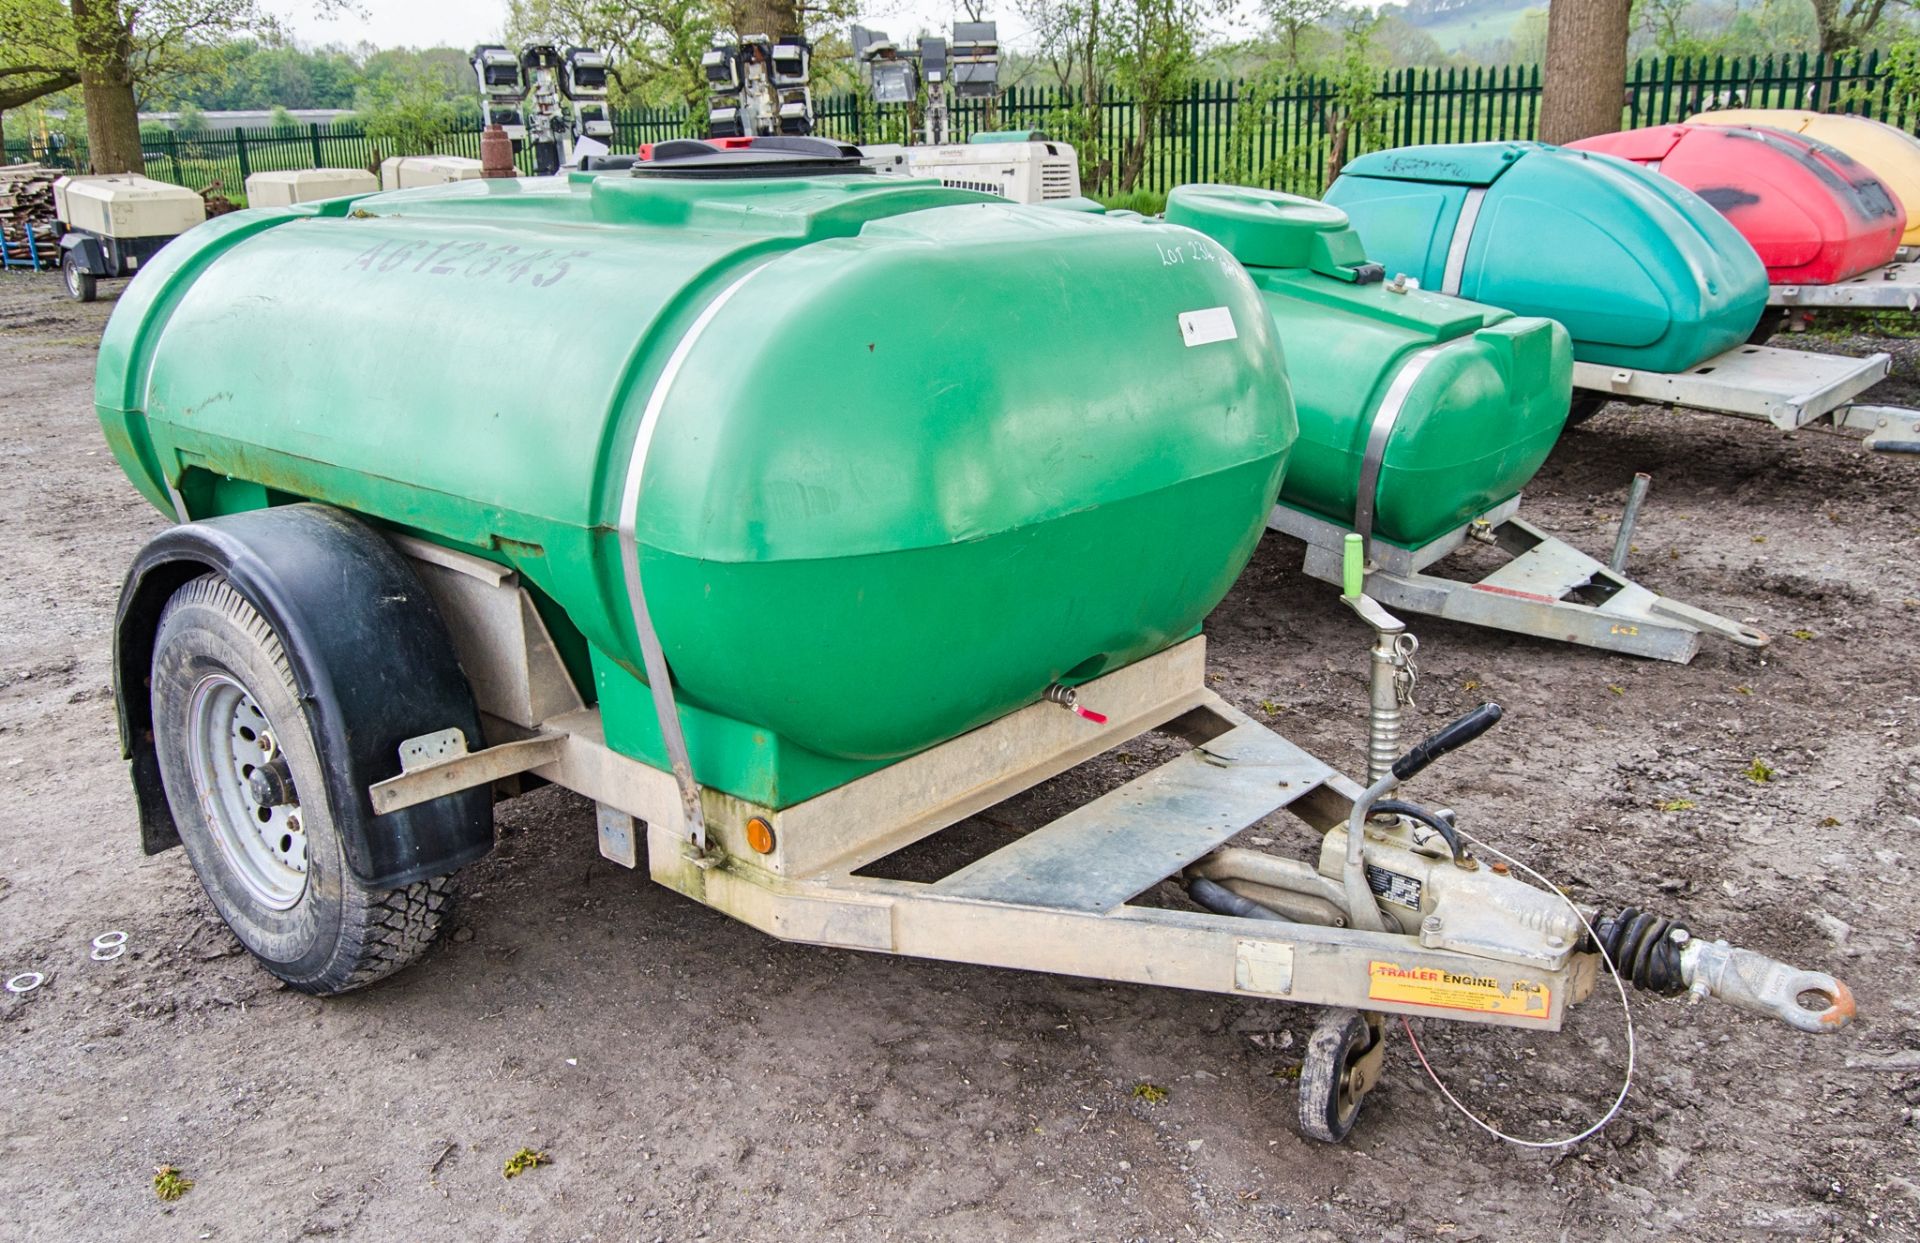 Trailer Engineering 2000 litre fast tow mobile water bowser A612645 - Bild 2 aus 6